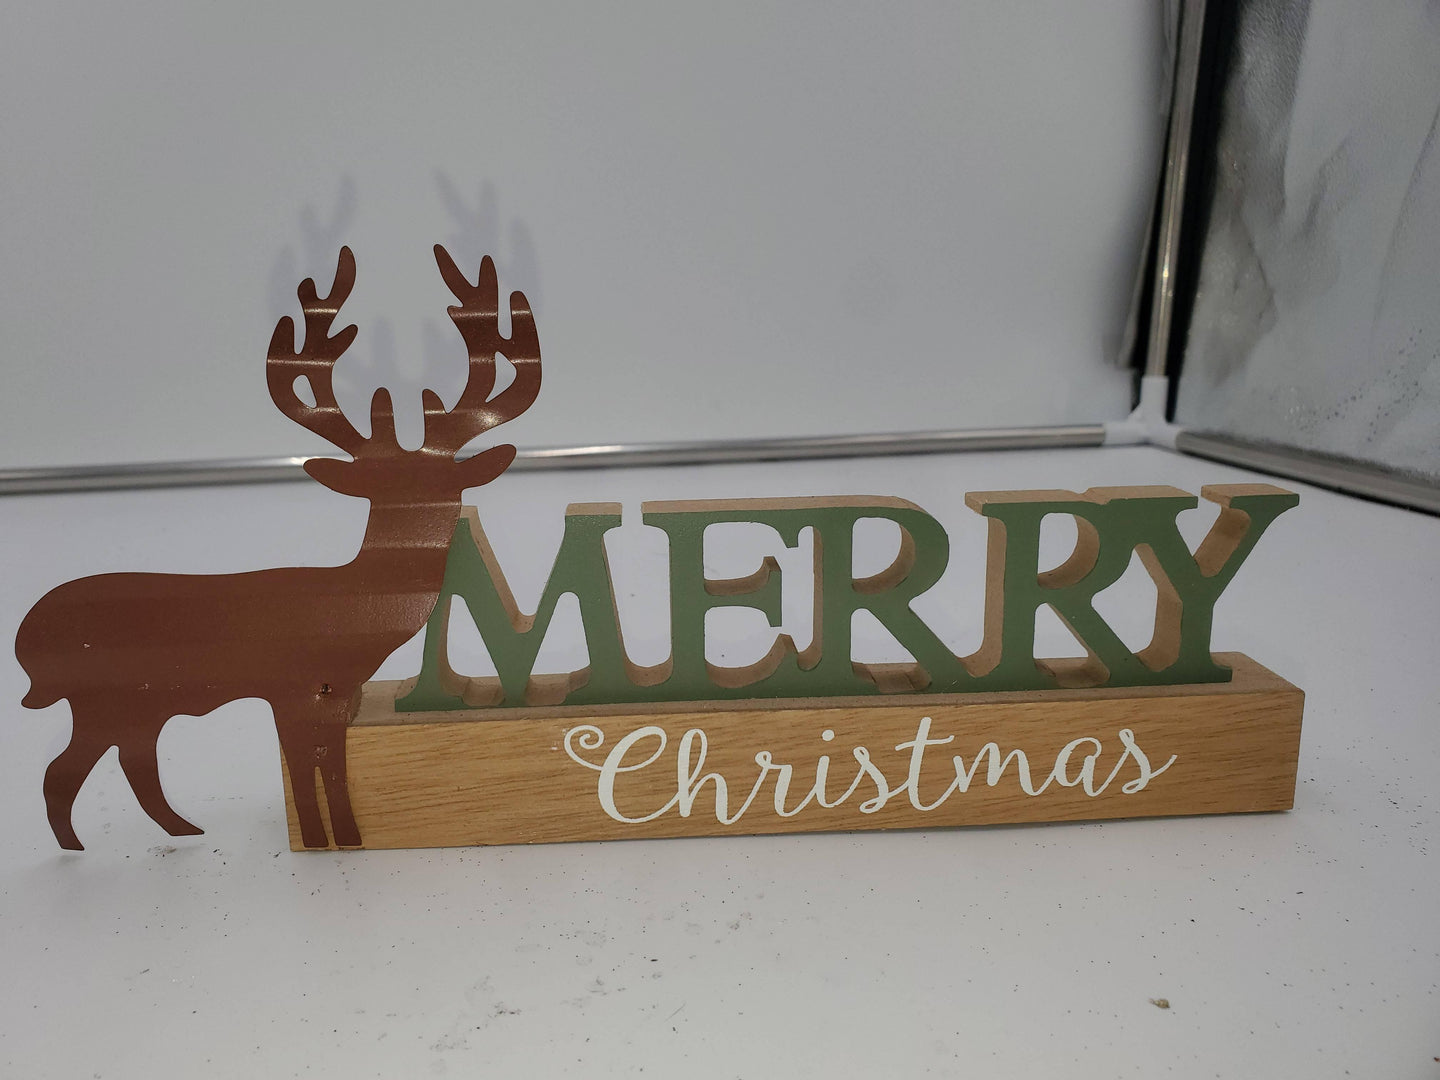 Merry Christmas & Deer - Village Floral Designs and Gifts